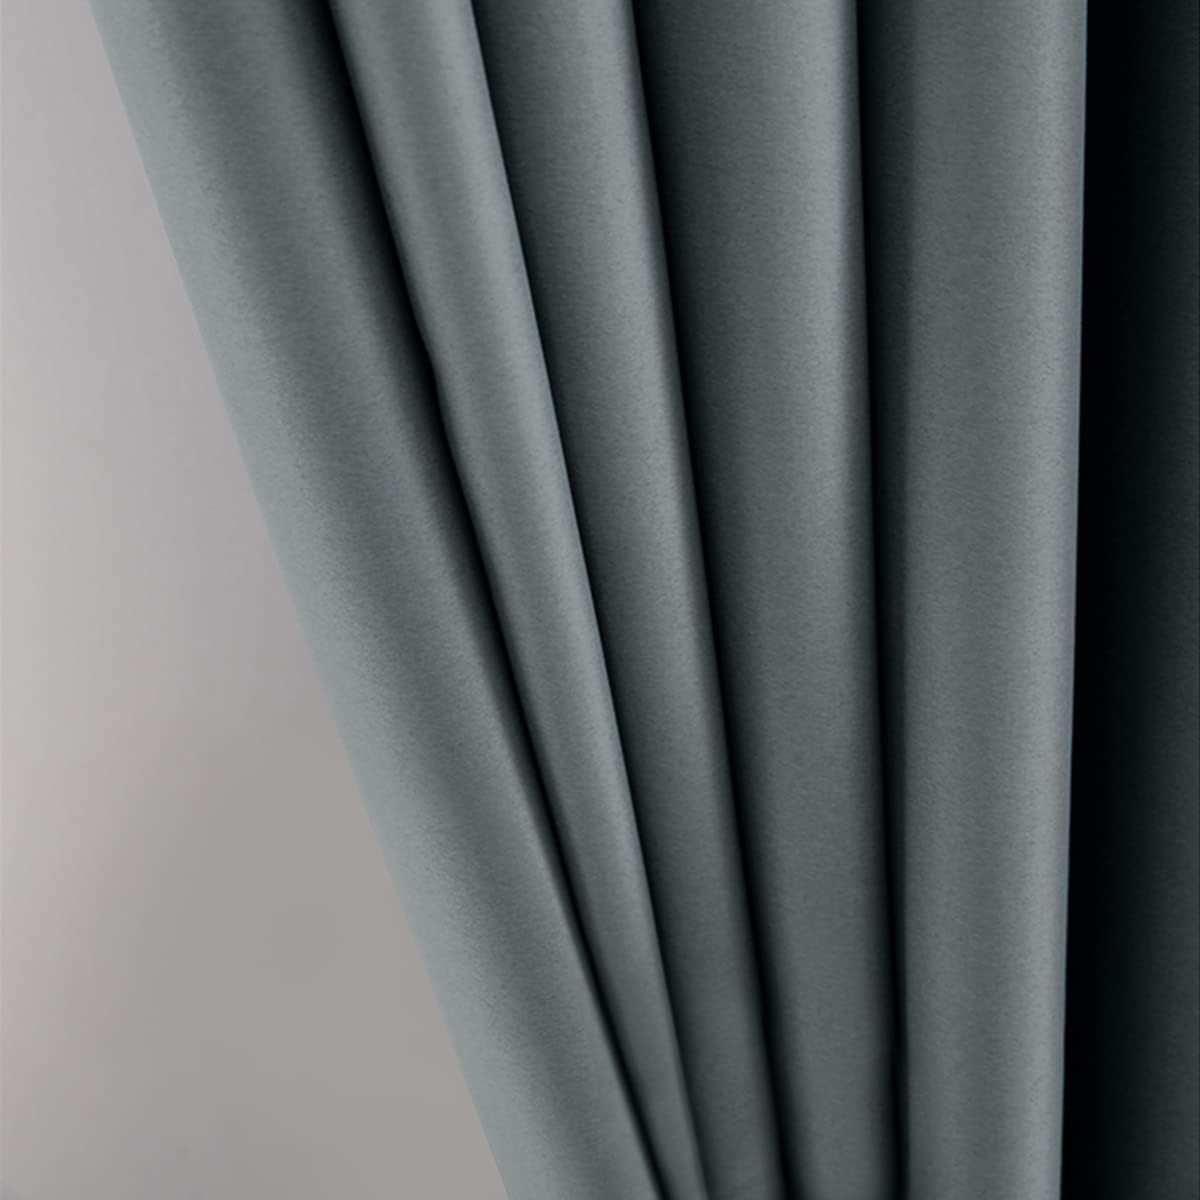 Pinch Pleat Solid Thermal Insulated 95% Greyout Patio Door Curtain Panel Drape for Traverse Rod and Track, Grey 84" W X 102" L (One Panel)